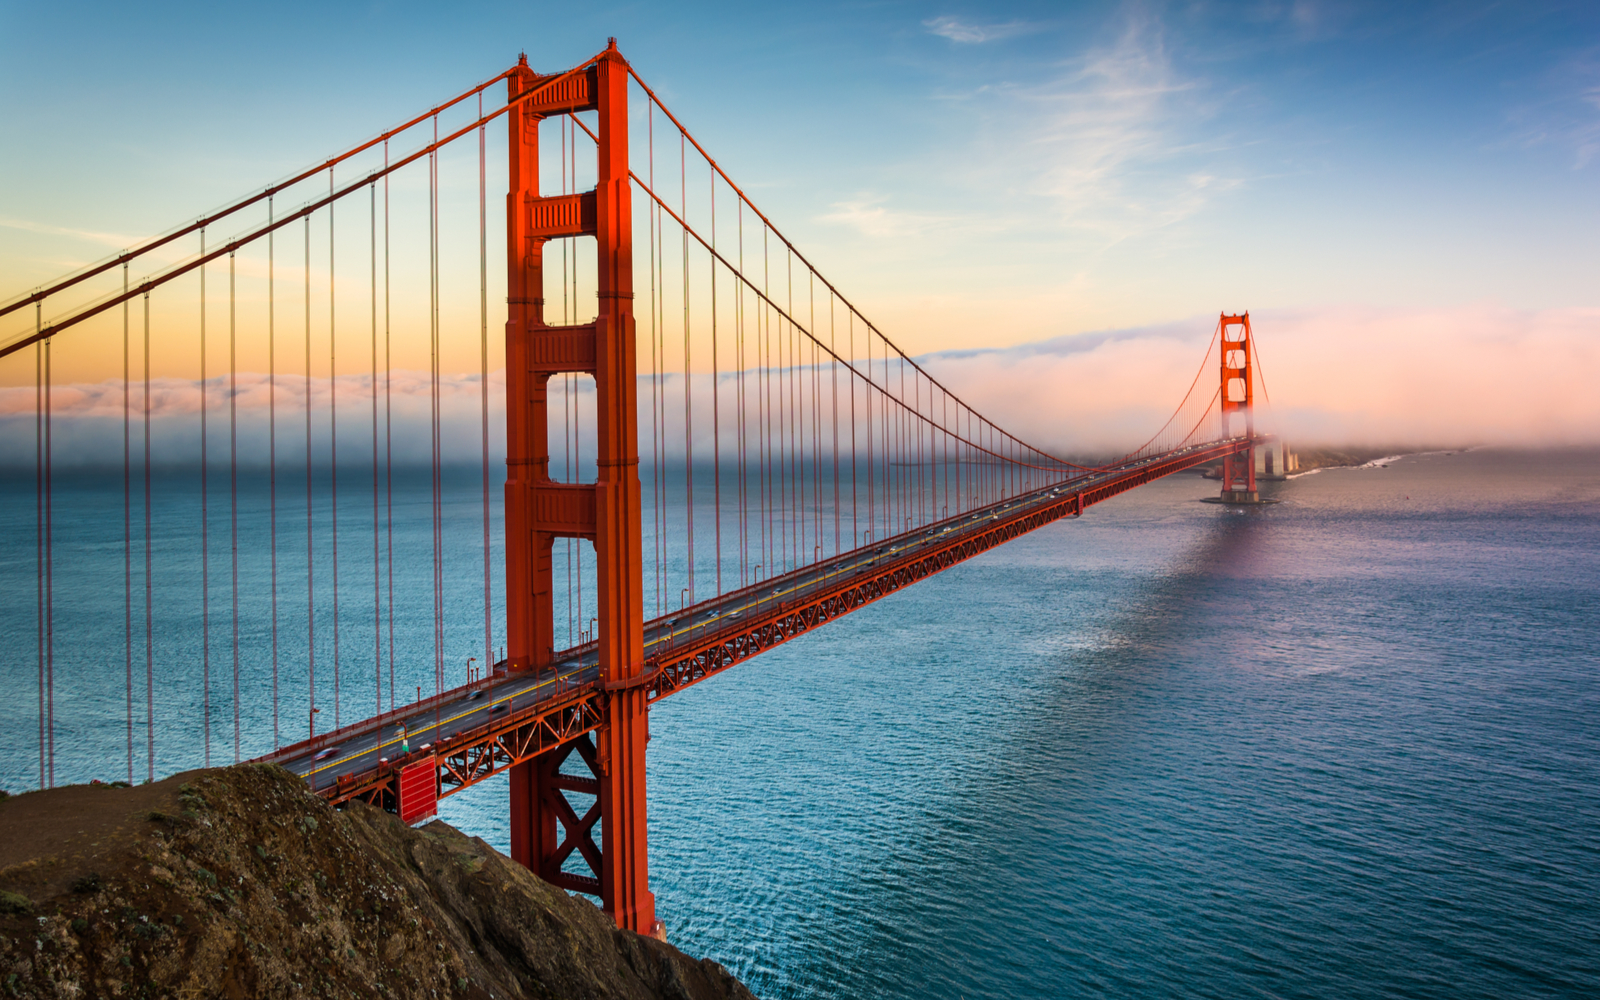 As the image for a piece on the best time to visit San Francisco, a giant red bridge spanning the channel